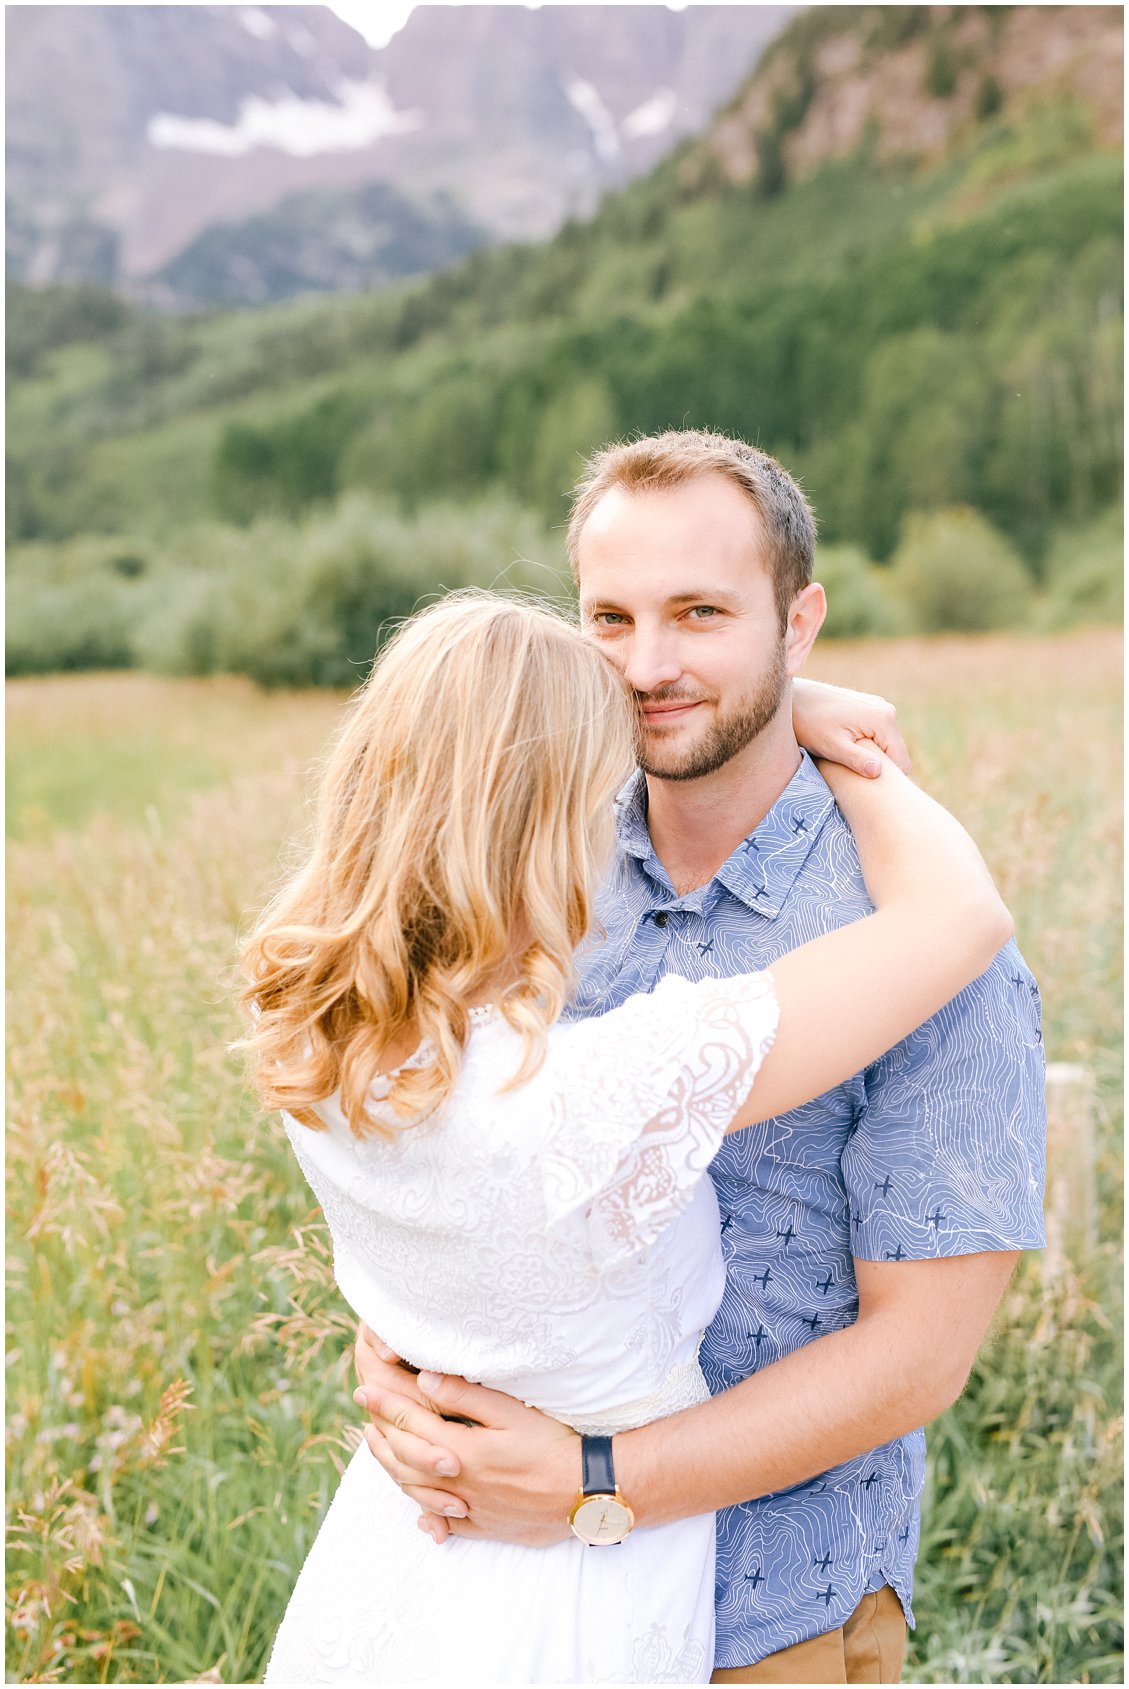 A bohemian and adventurous destination couples anniversary photography session at the Maroon Bells national park in Aspen Colorado by husband and wife team Pattengale Photography